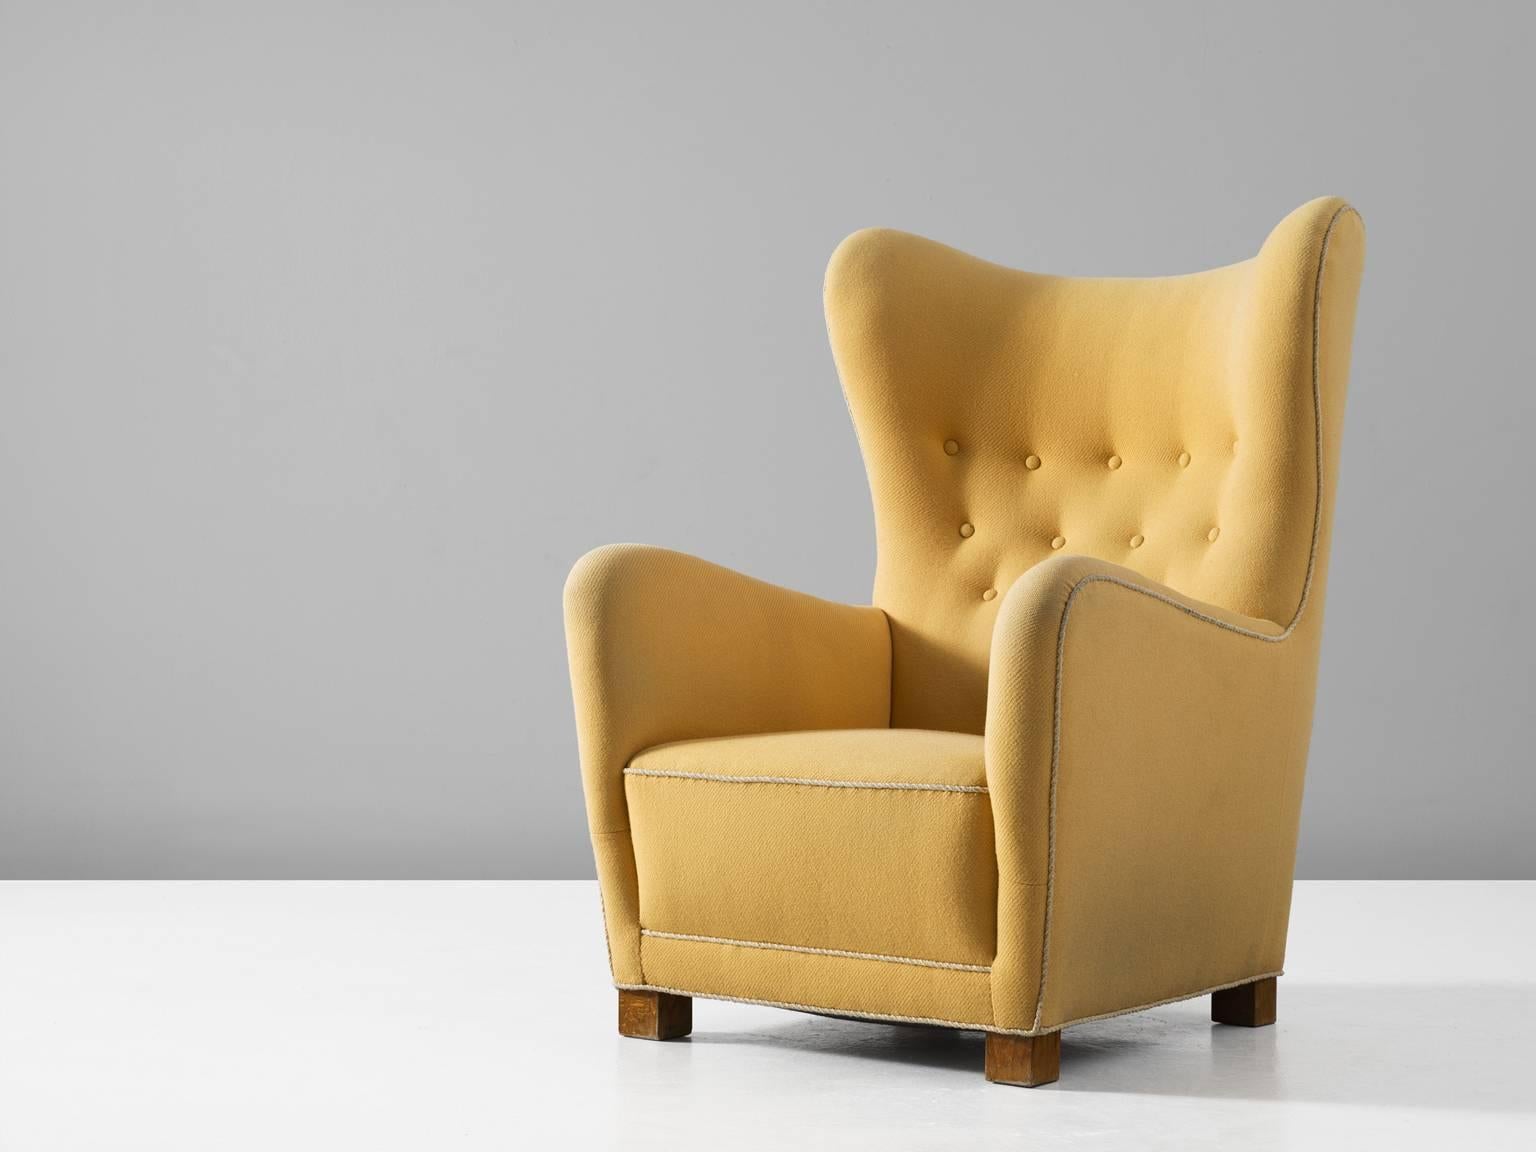 Wingback chair, in oak and fabric, for Fritz Hansen, Denmark, circa 1945.

Classical high back chair, with beautiful tufted back. Inspired on a traditional wingback chair, yet minimized to a Scandinavian Modern design. This lounge chairs shows